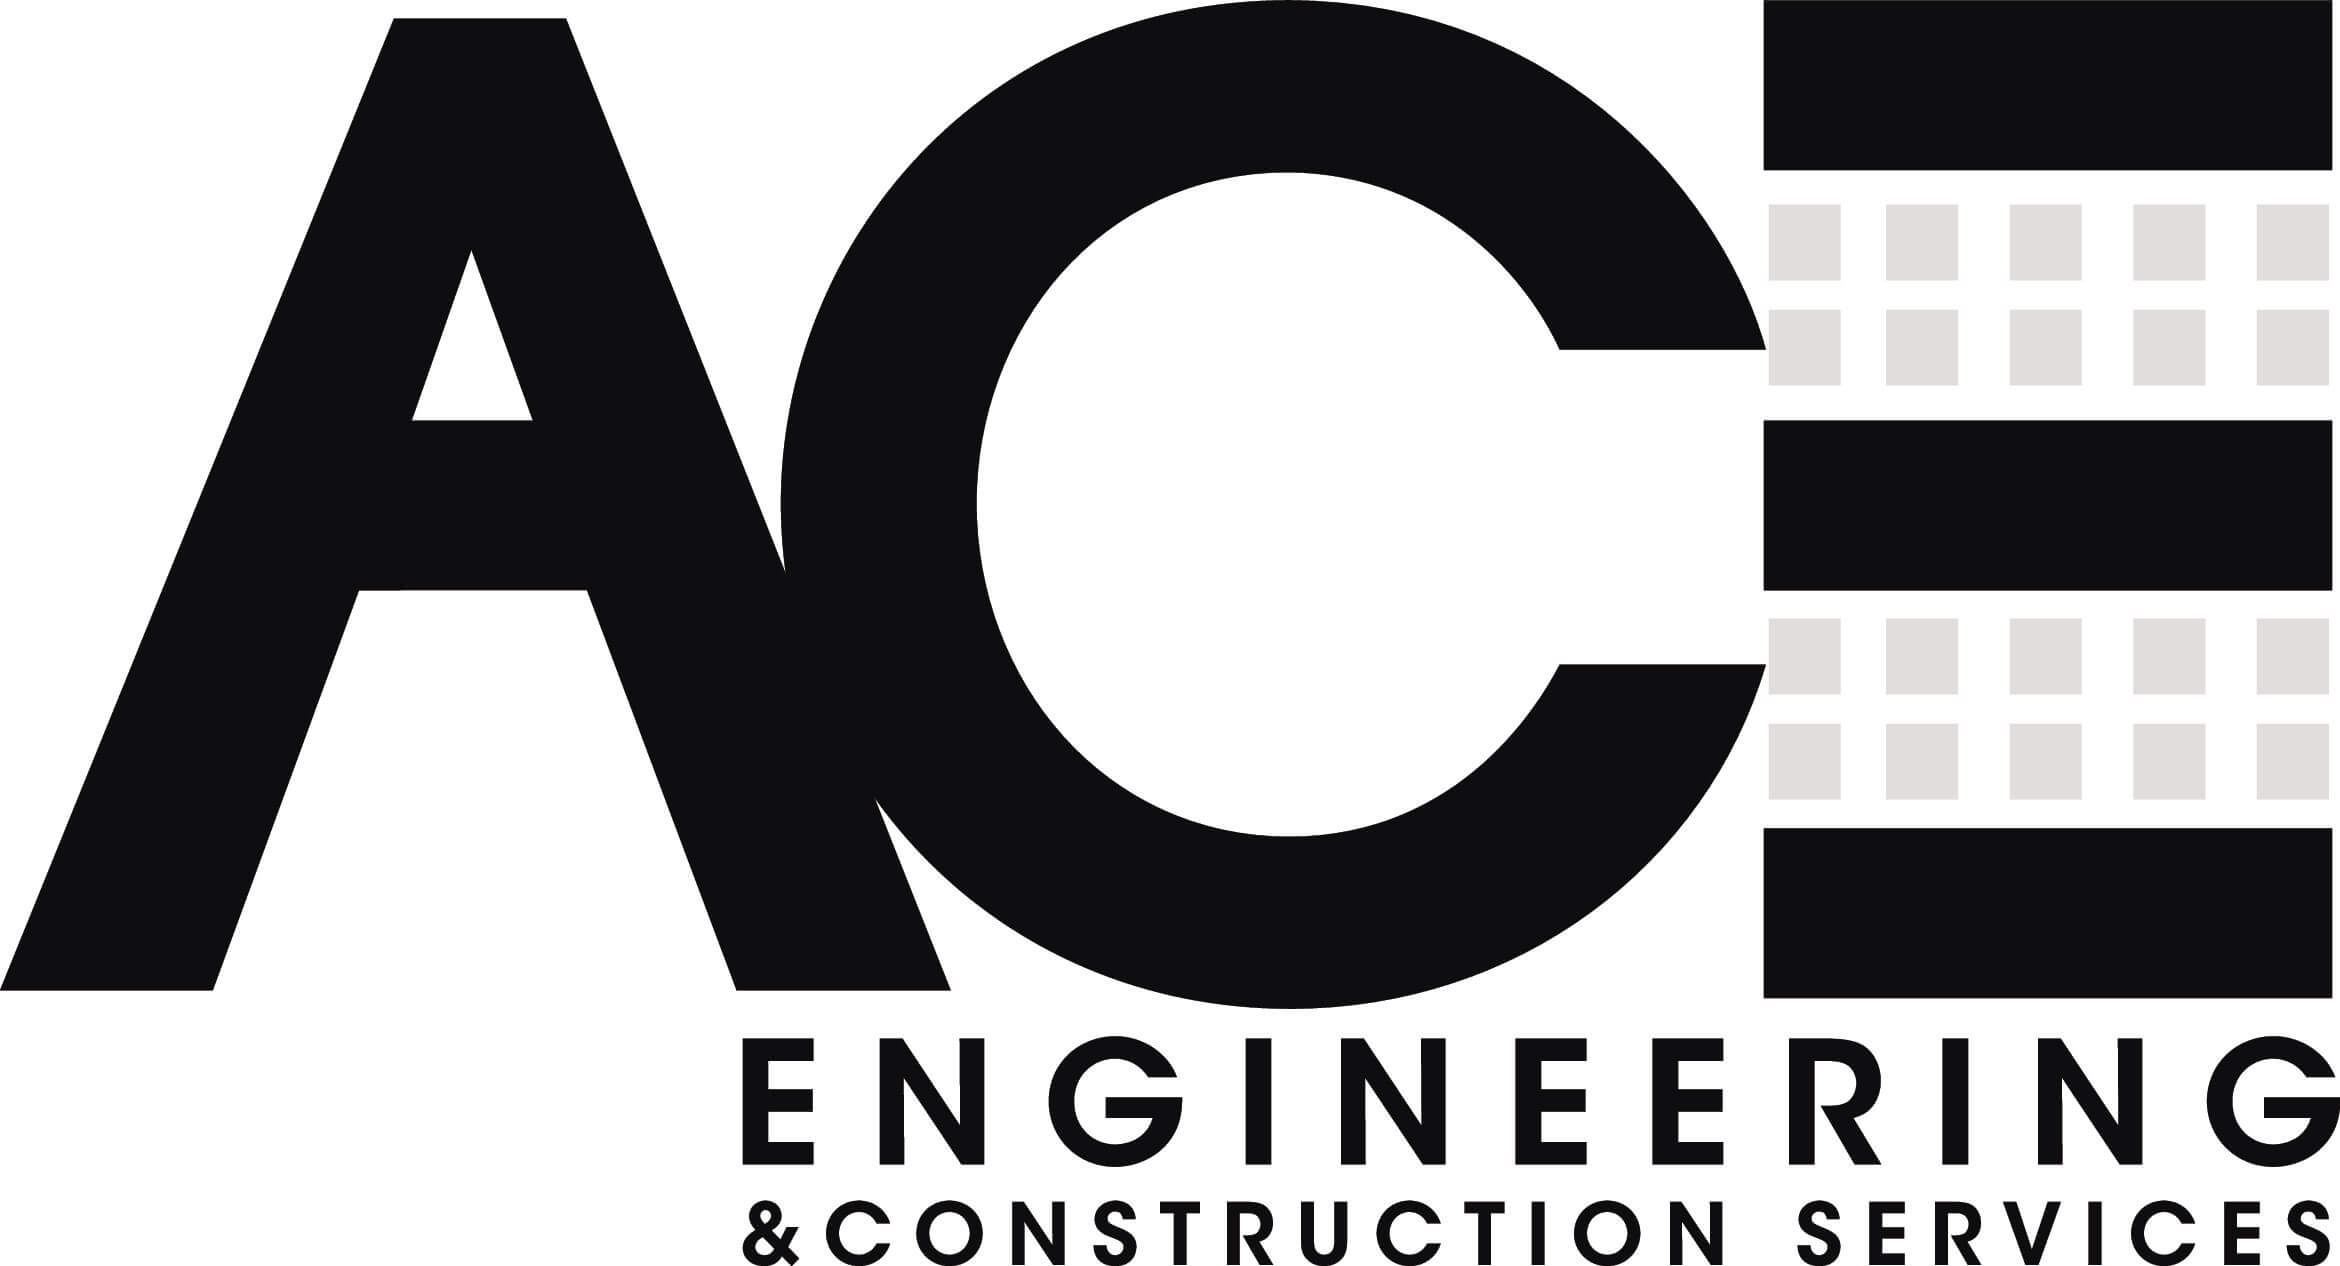 Ace Engineering and Construction Services, LLC